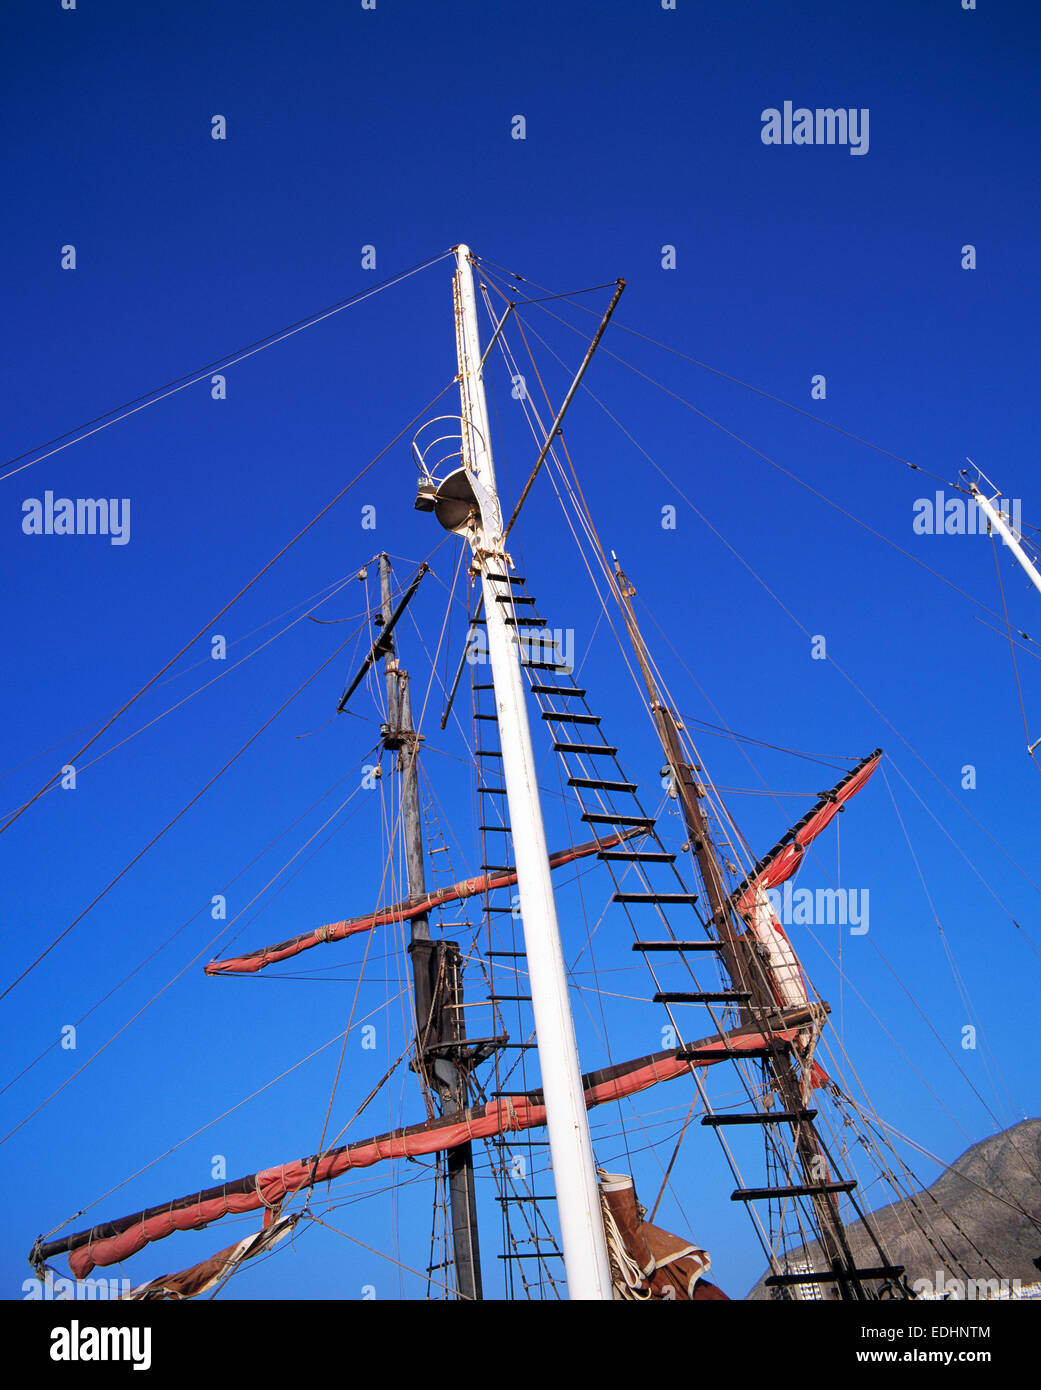 sailing ship, vessels mast, masts and rigging, lookout, crows nest, Jacobs ladder, seaport, Spain, Canary Islands, Canaries, Tenerife, Santa Cruz de Tenerife Stock Photo